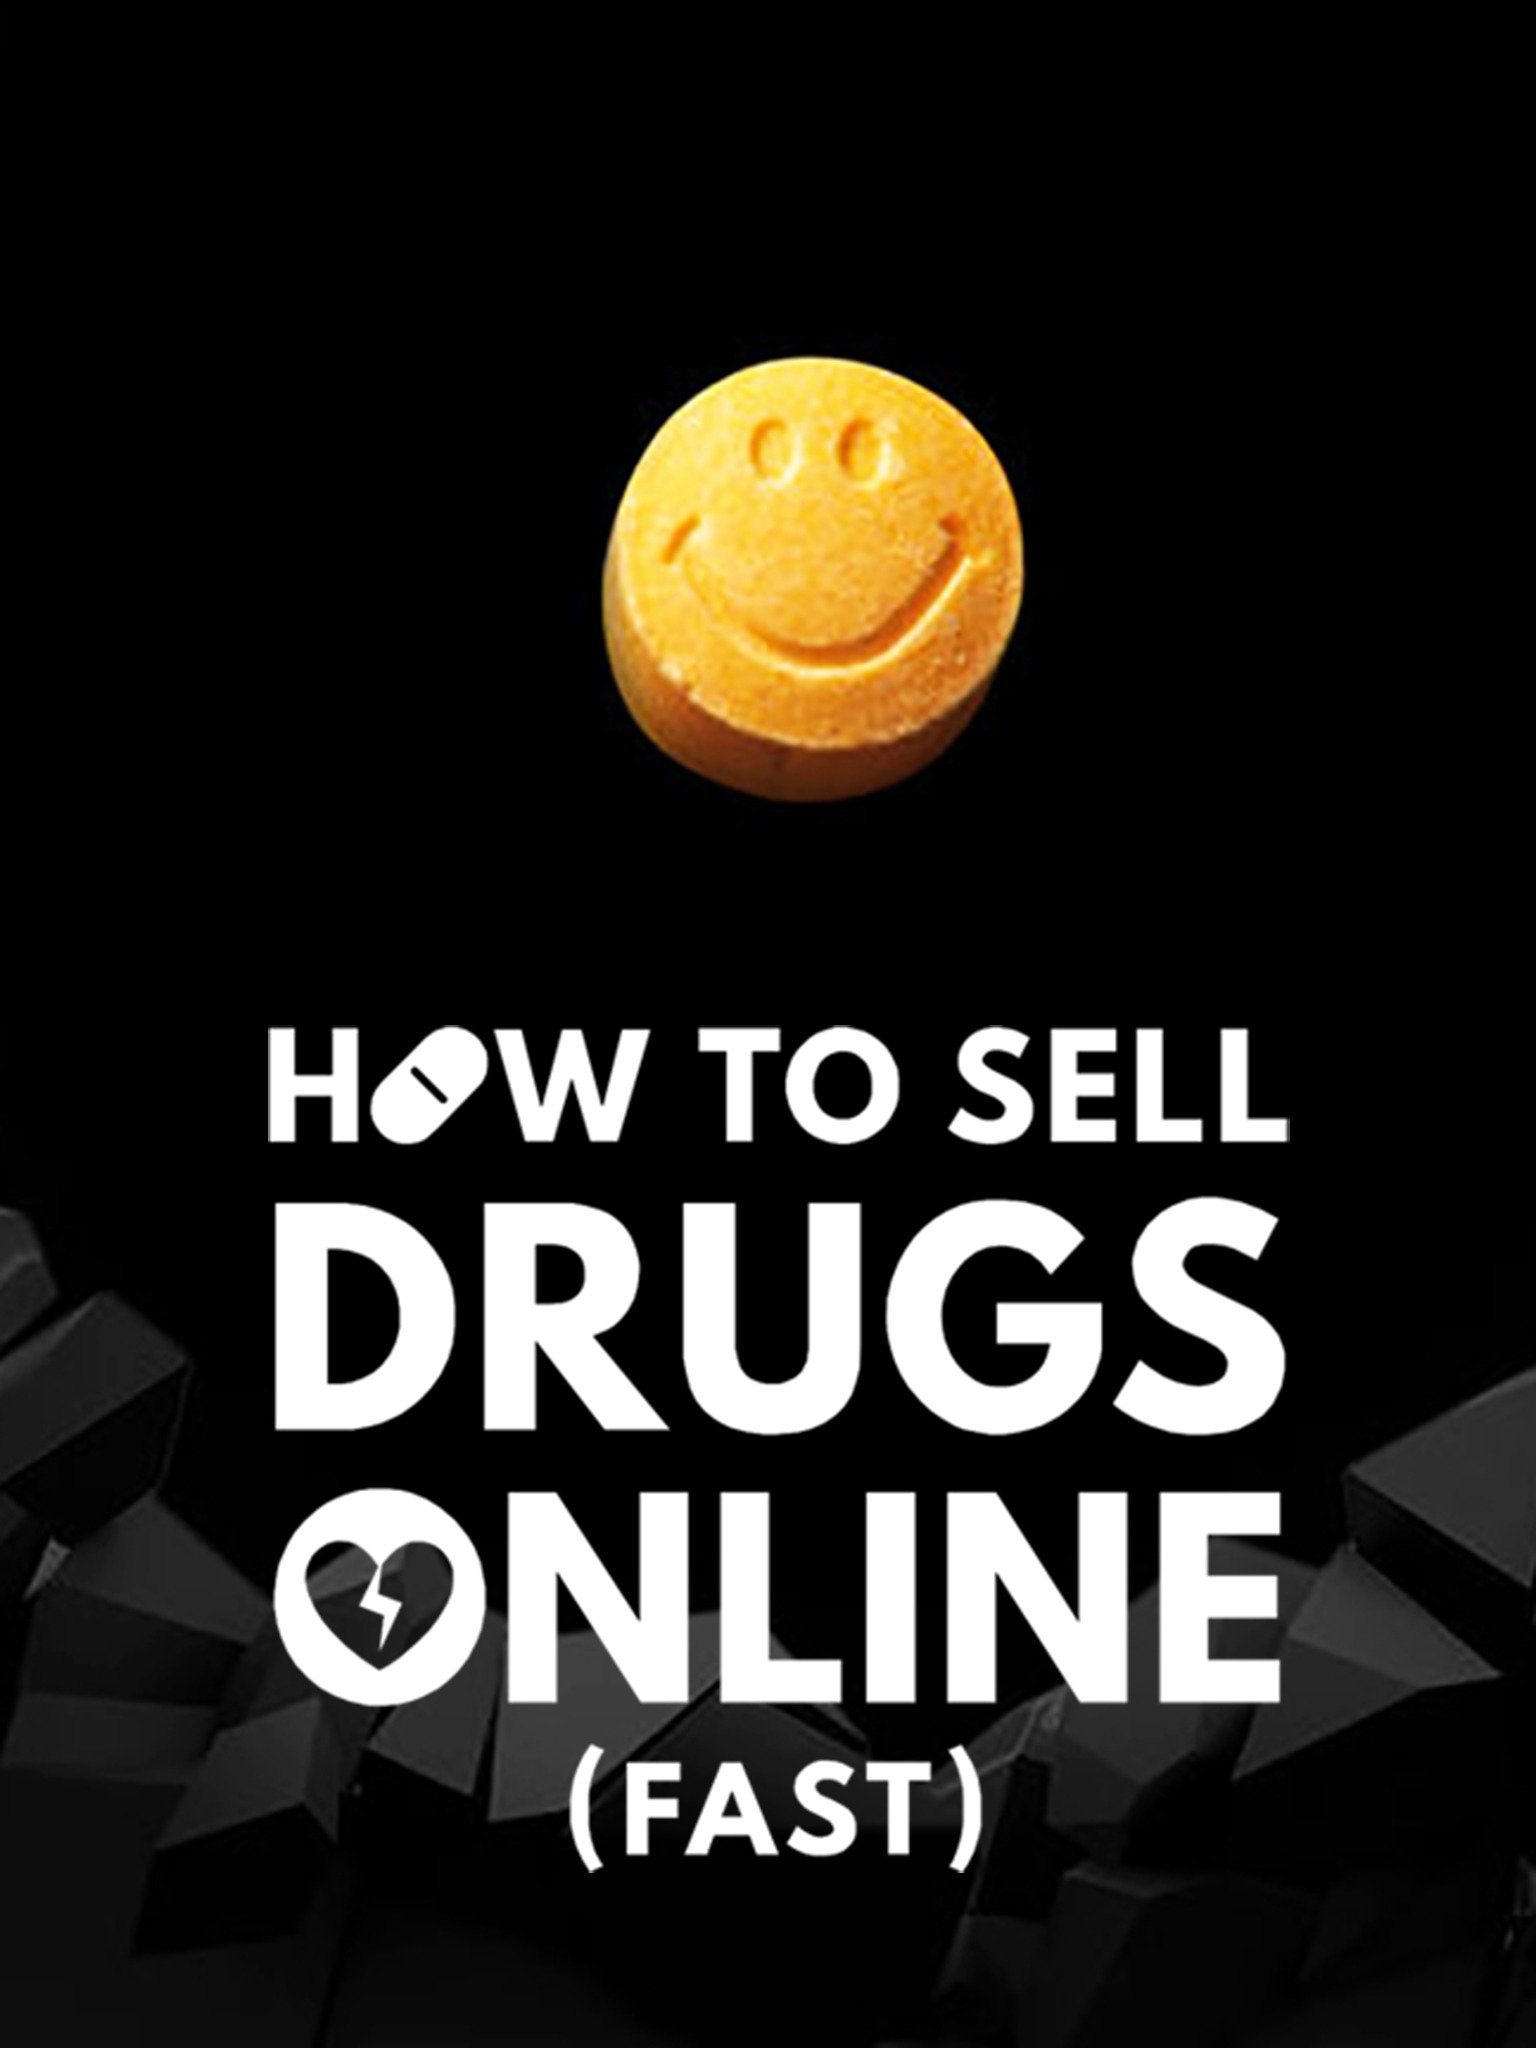 How to Sell Drugs Online (Fast): Season 1 Trailer - Rotten Tomatoes